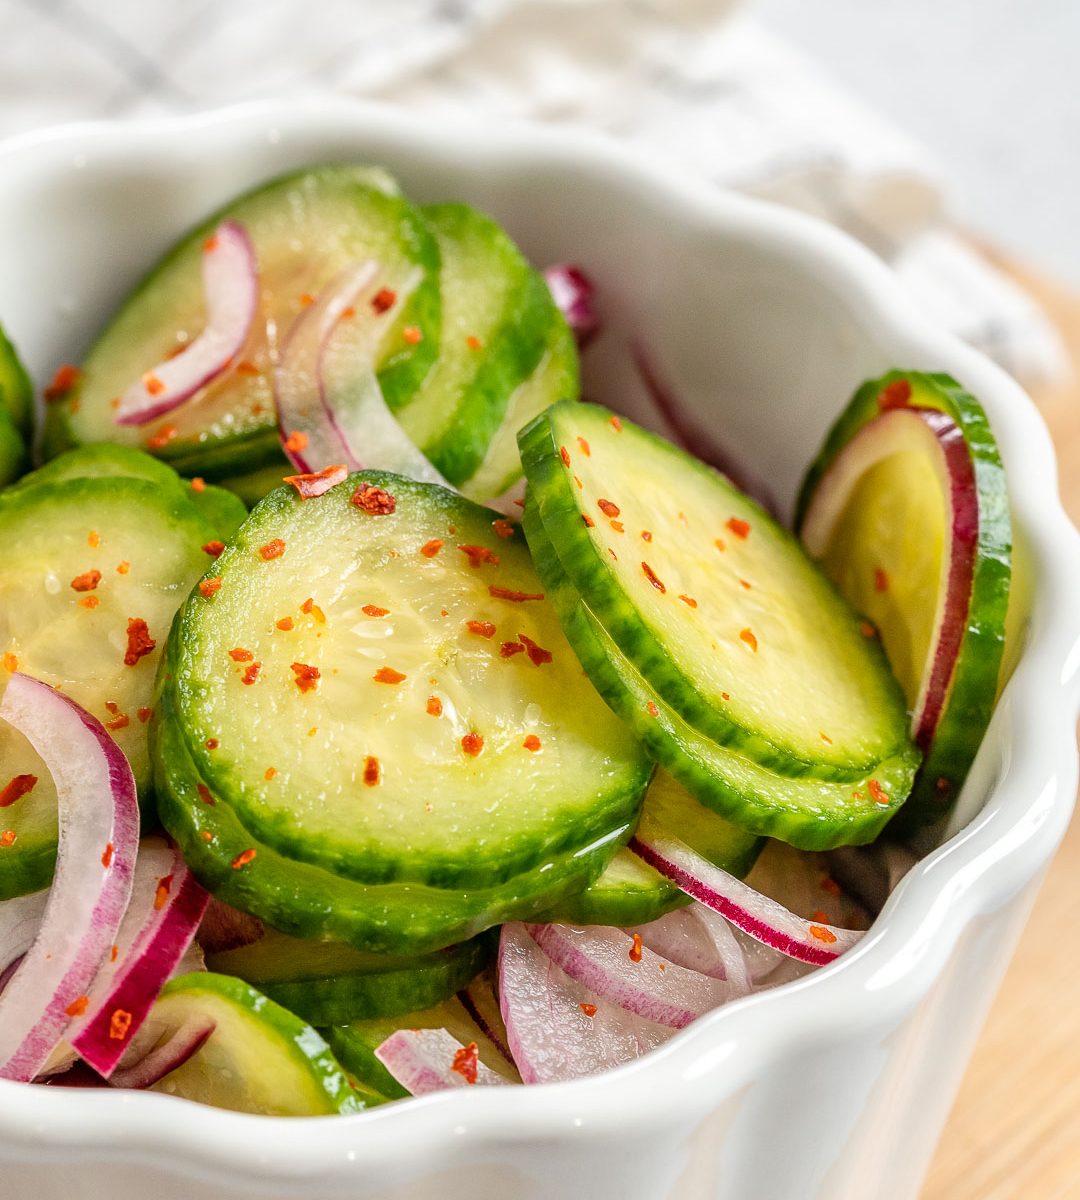 Quick Pickled Cucumber (How to Pickle Cucumbers)